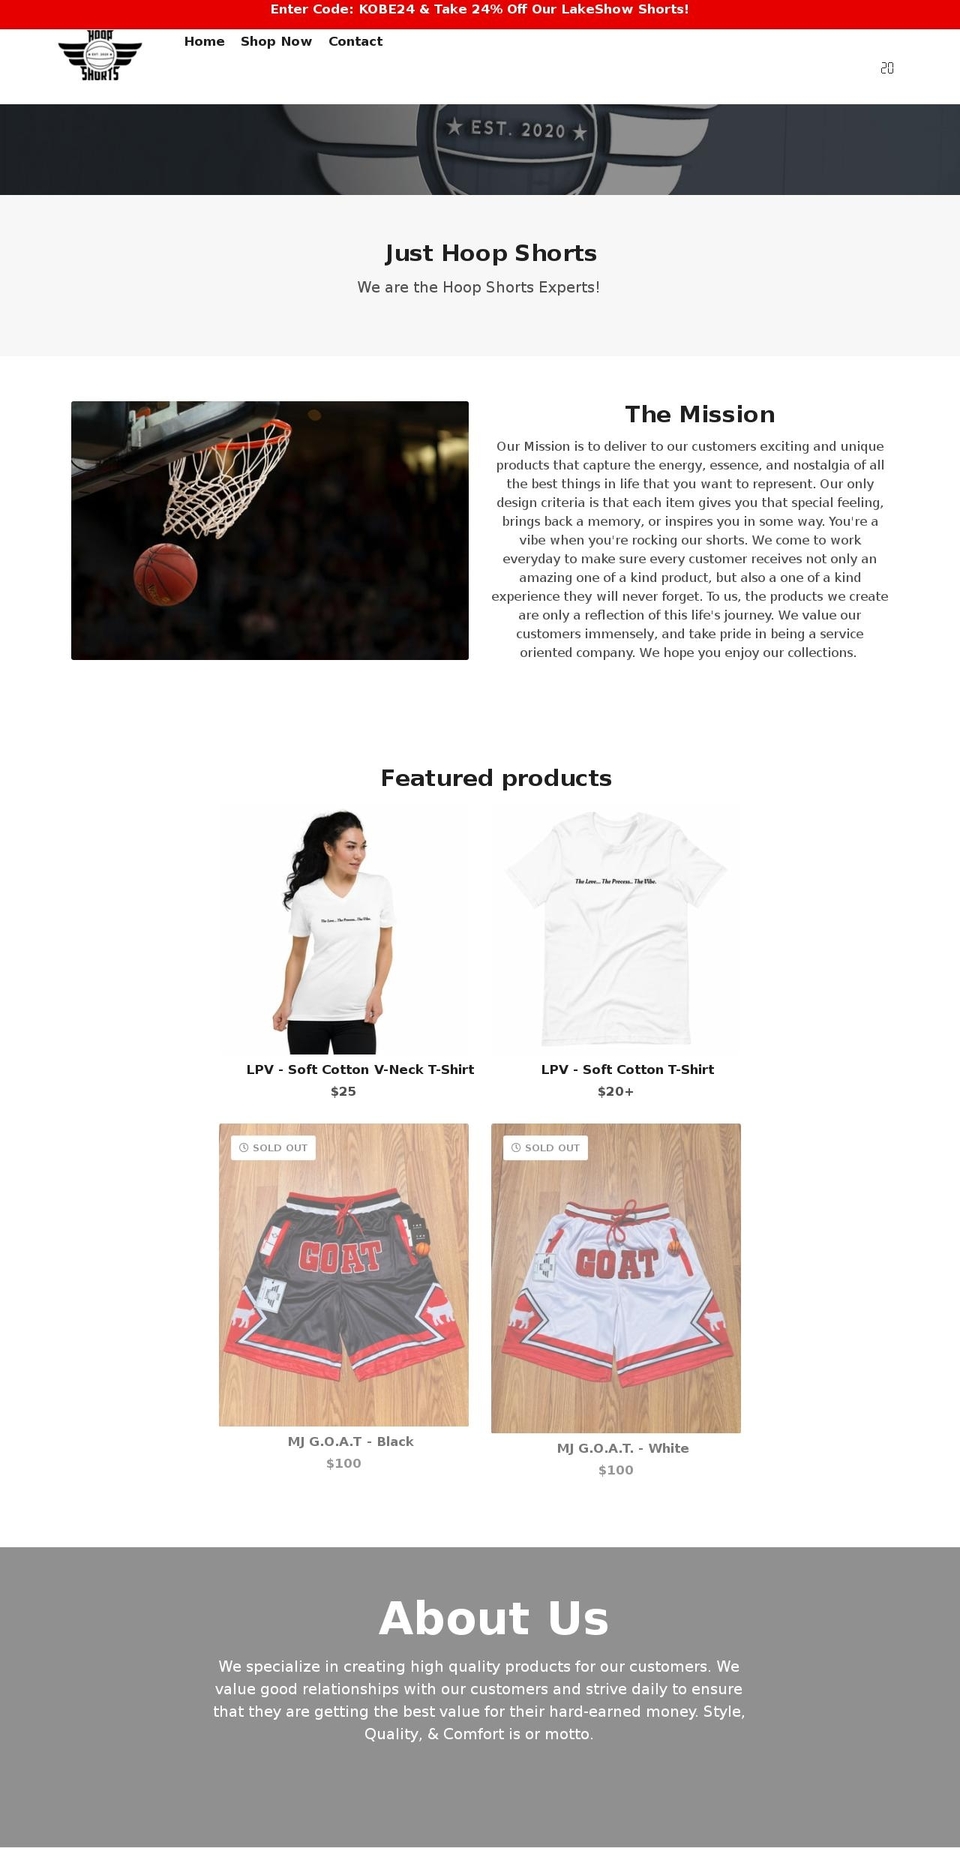 Theme export Shopify theme site example justhoopshorts.com